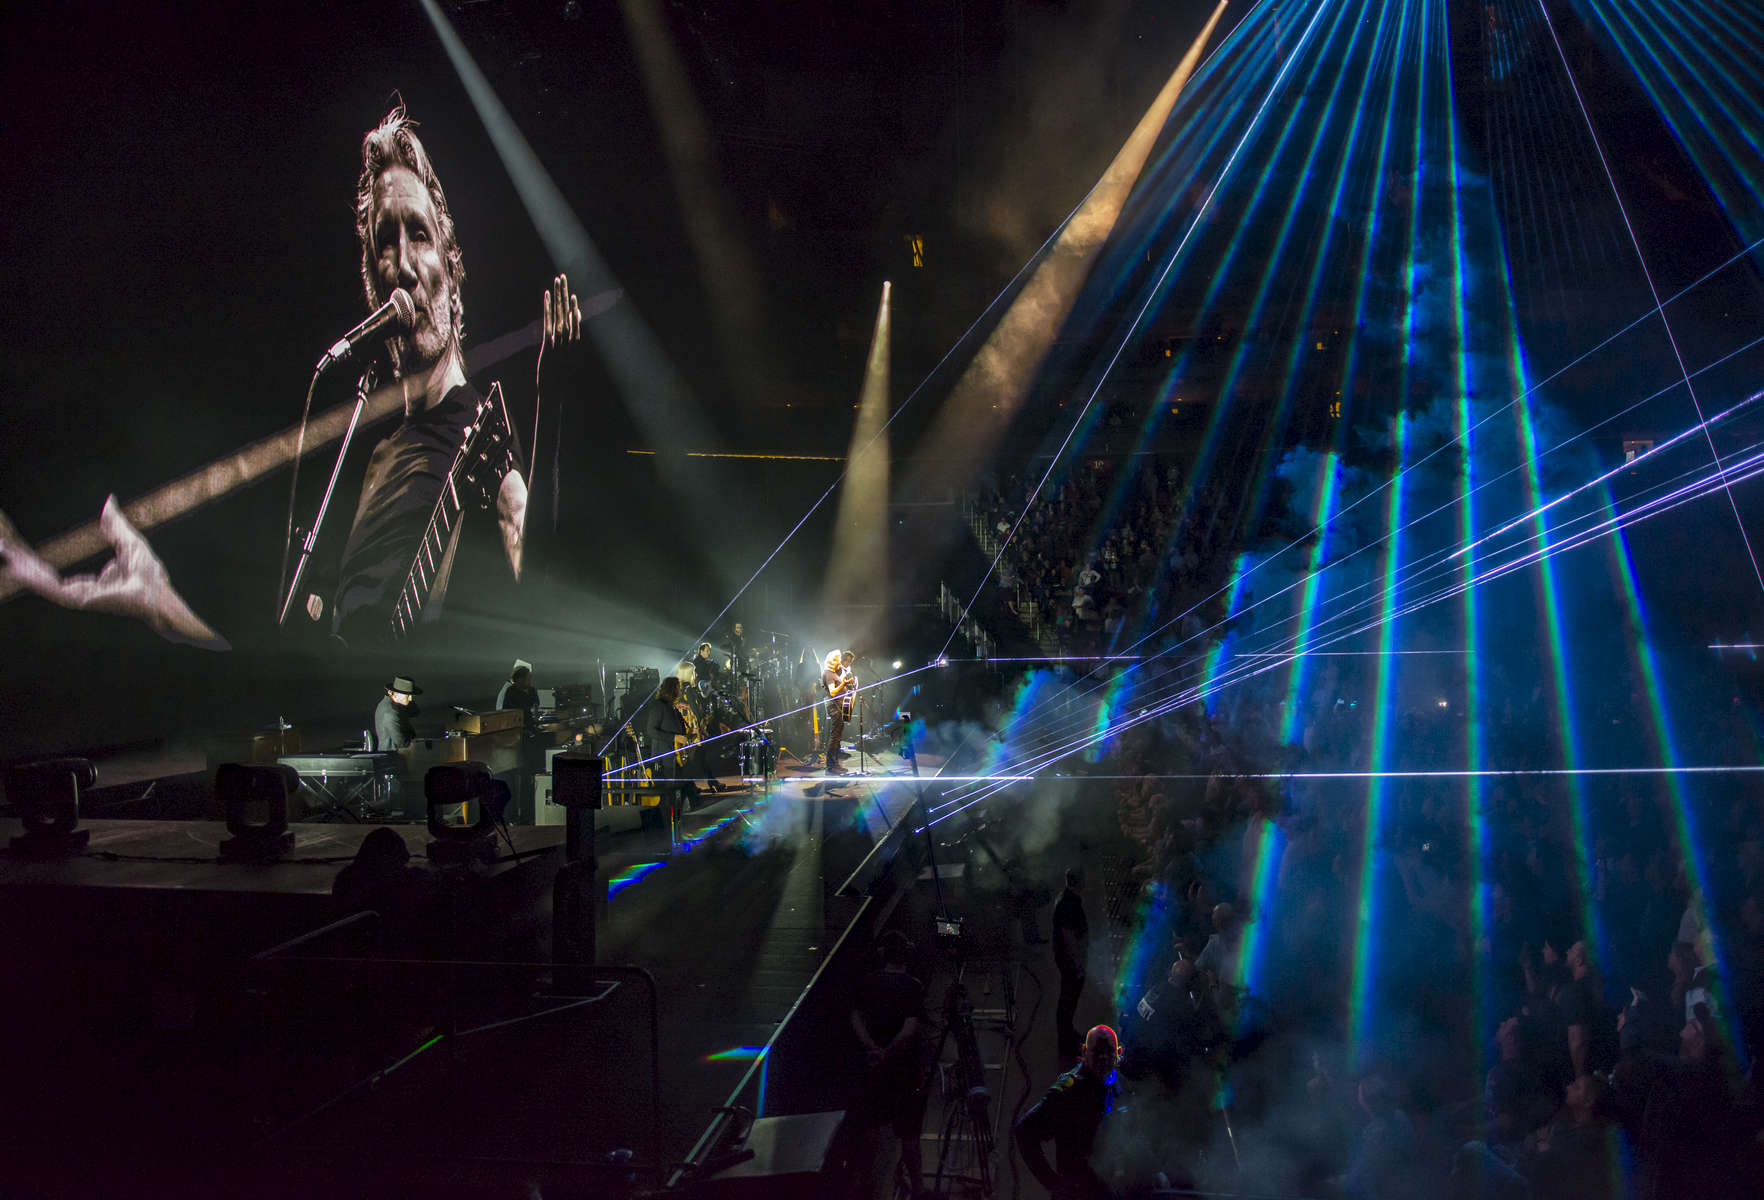 Roger Waters performs live inside Prudential Center located at 25 Lafayette Street in Newark, New Jersey on Thursday, September 7, 2017. The stage and the set are designed by creative director and set designer Sean Evans. 